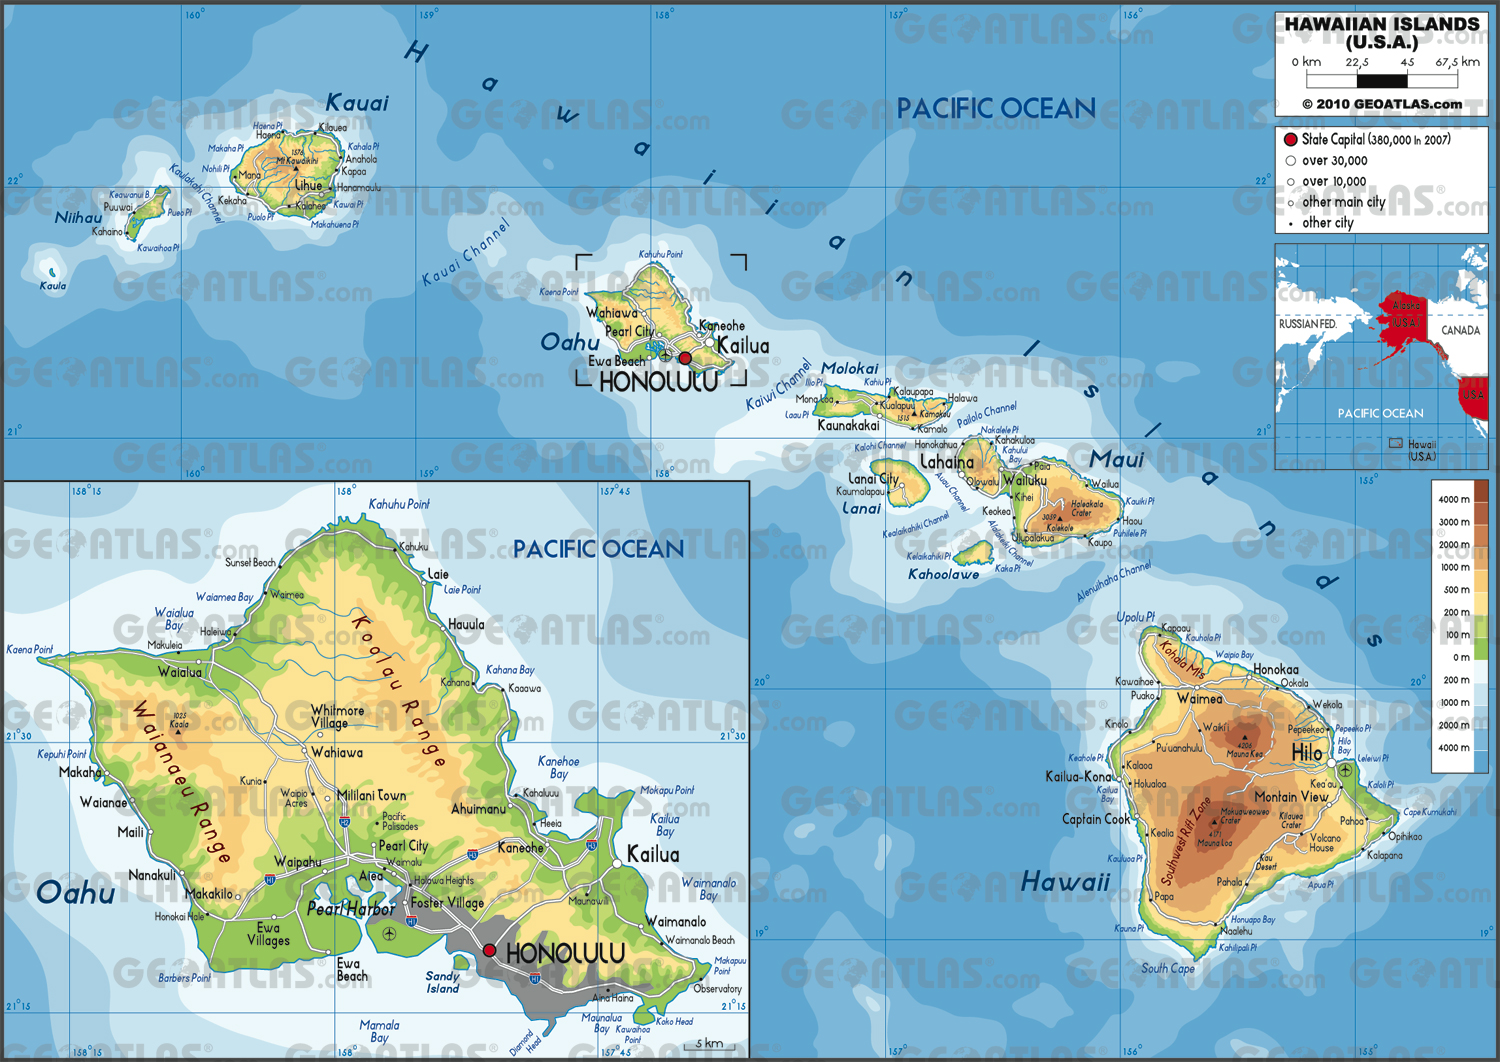 An overview of the hawaii island and geography